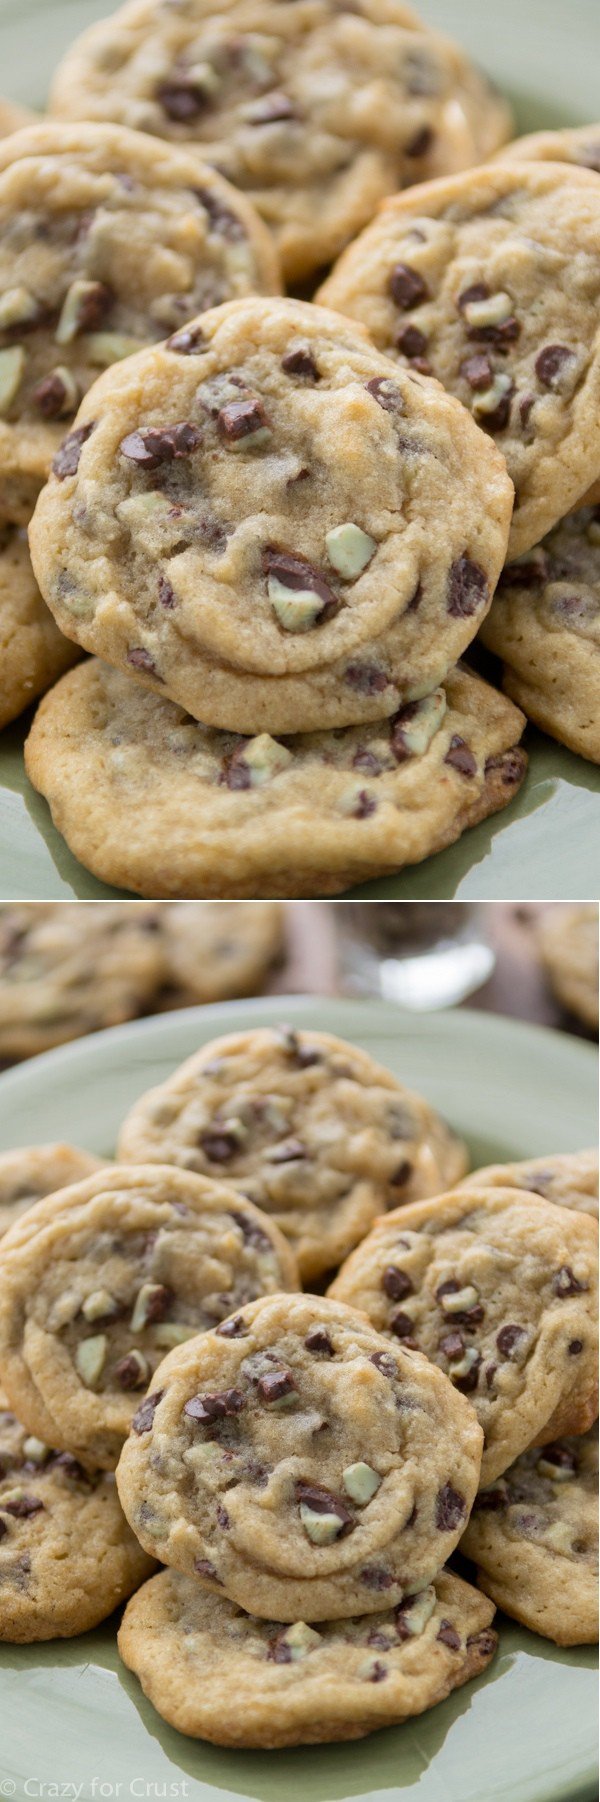 Mint Chip Chocolate Chip Cookies - Crazy for Crust